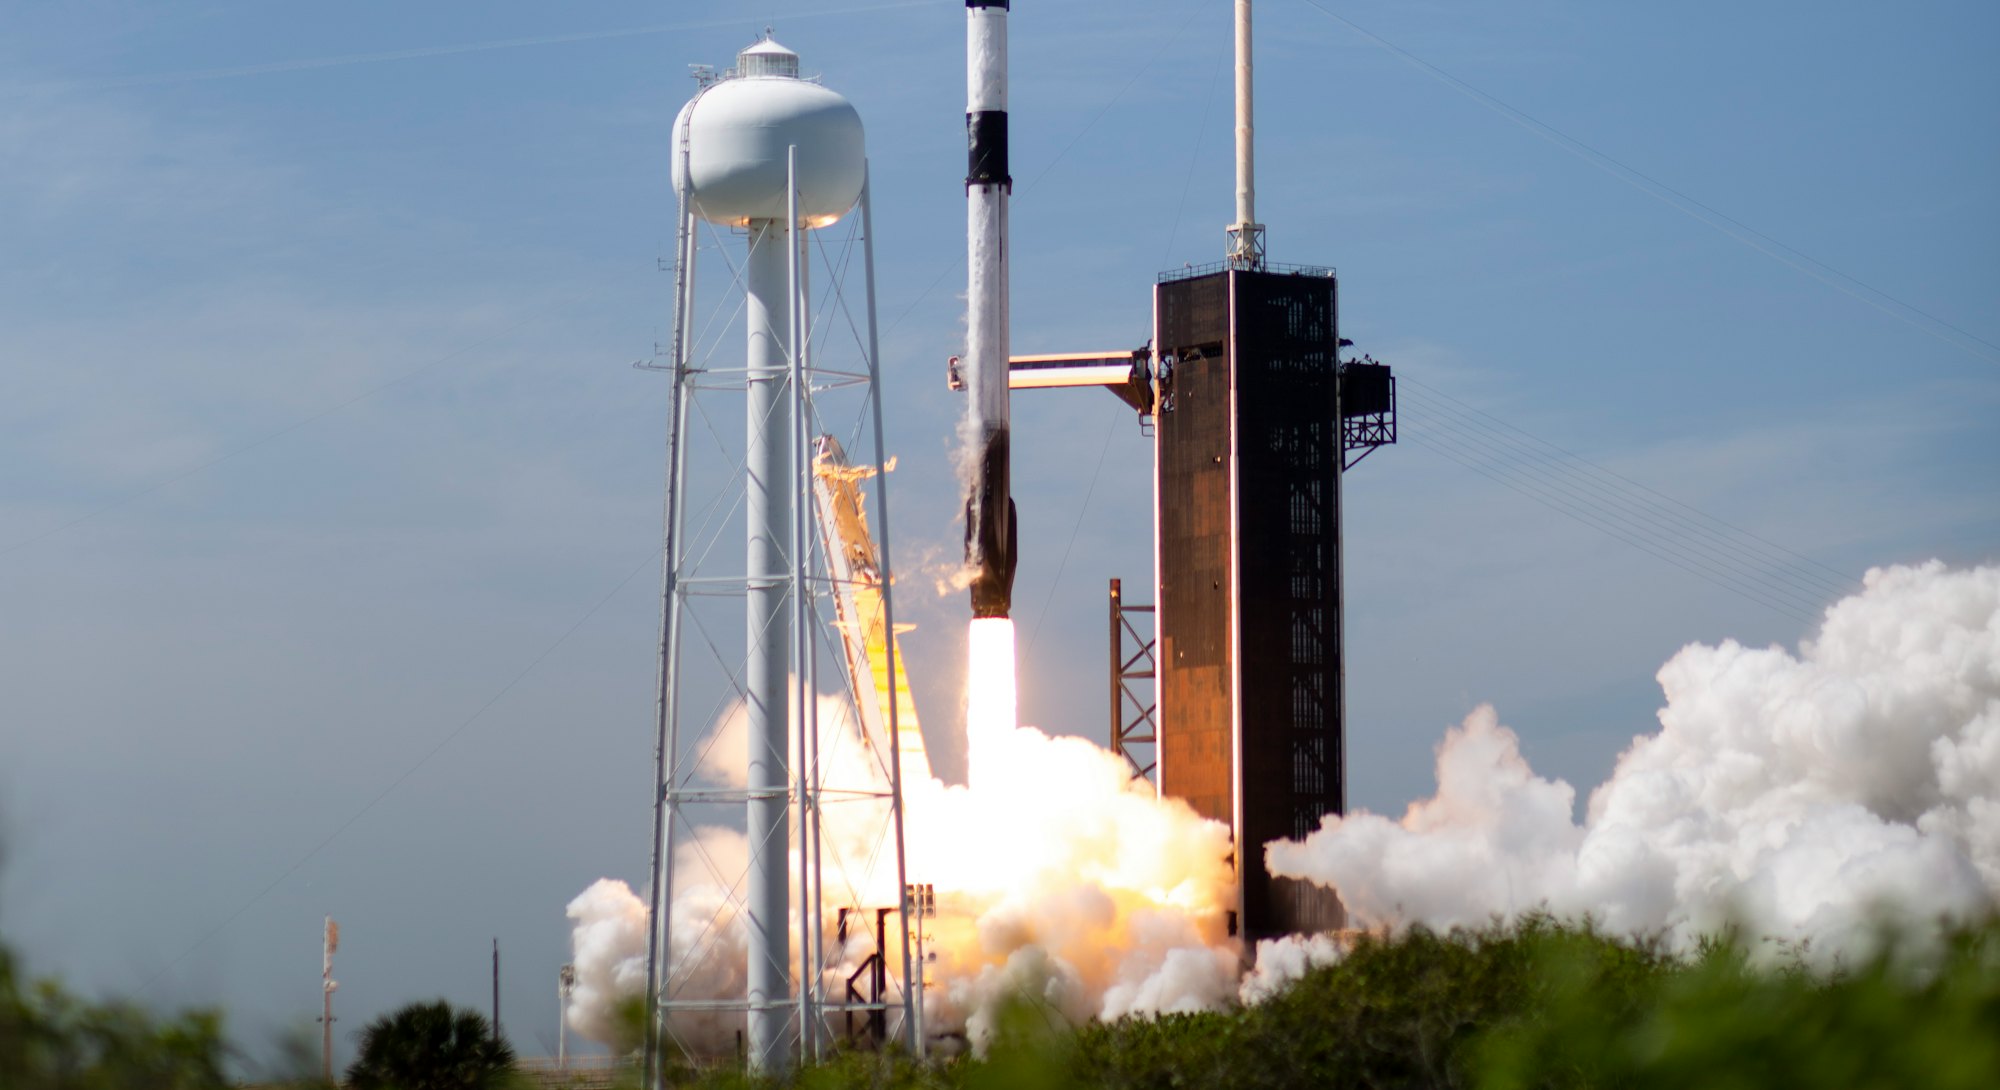 CAPE CANAVERAL, FL - APRIL 8: In this NASA handout, A SpaceX Falcon 9 rocket carrying the company's ...